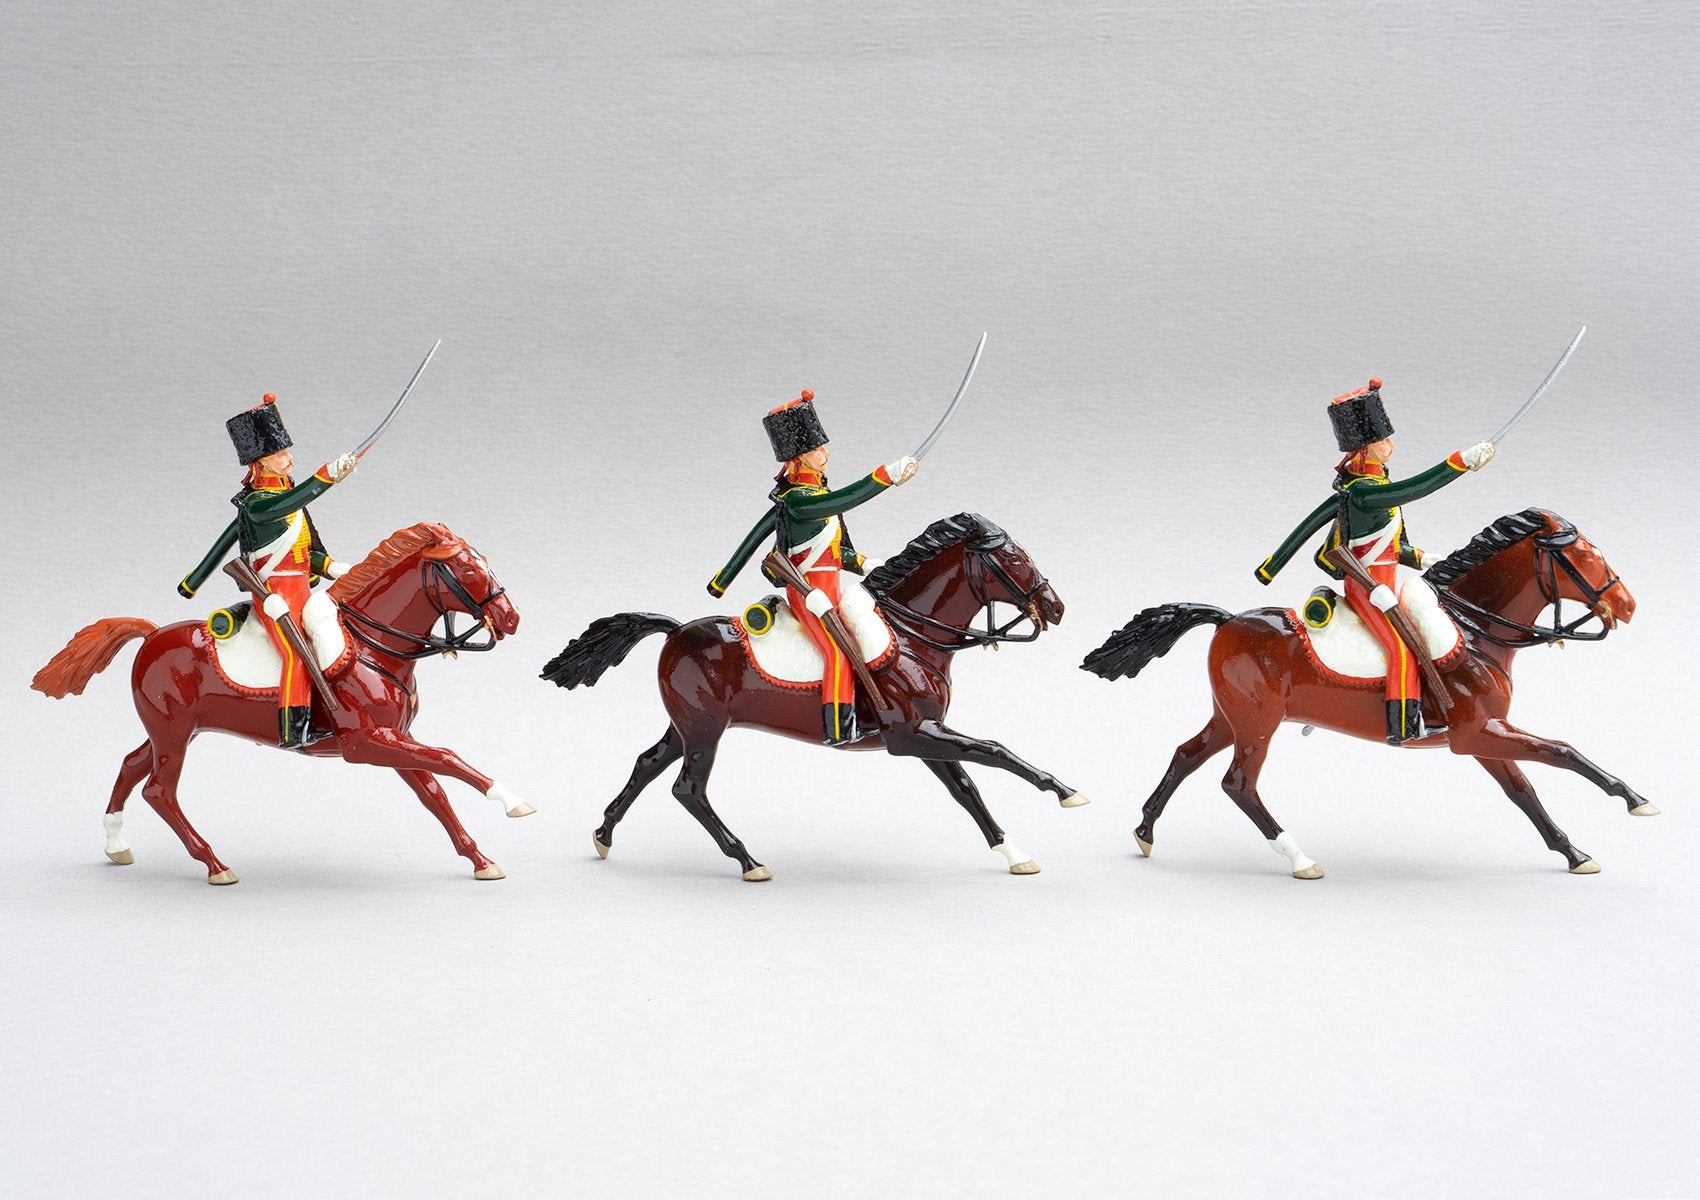 Set 150 7th Hussars  | French Cavalry | Napoleonic Wars | Three mounted cavalrymen with rifles and sabres. Bearskin colpack with red bag, green tunic and pelisse | Waterloo | © Imperial Productions | Sculpt by David Cowe